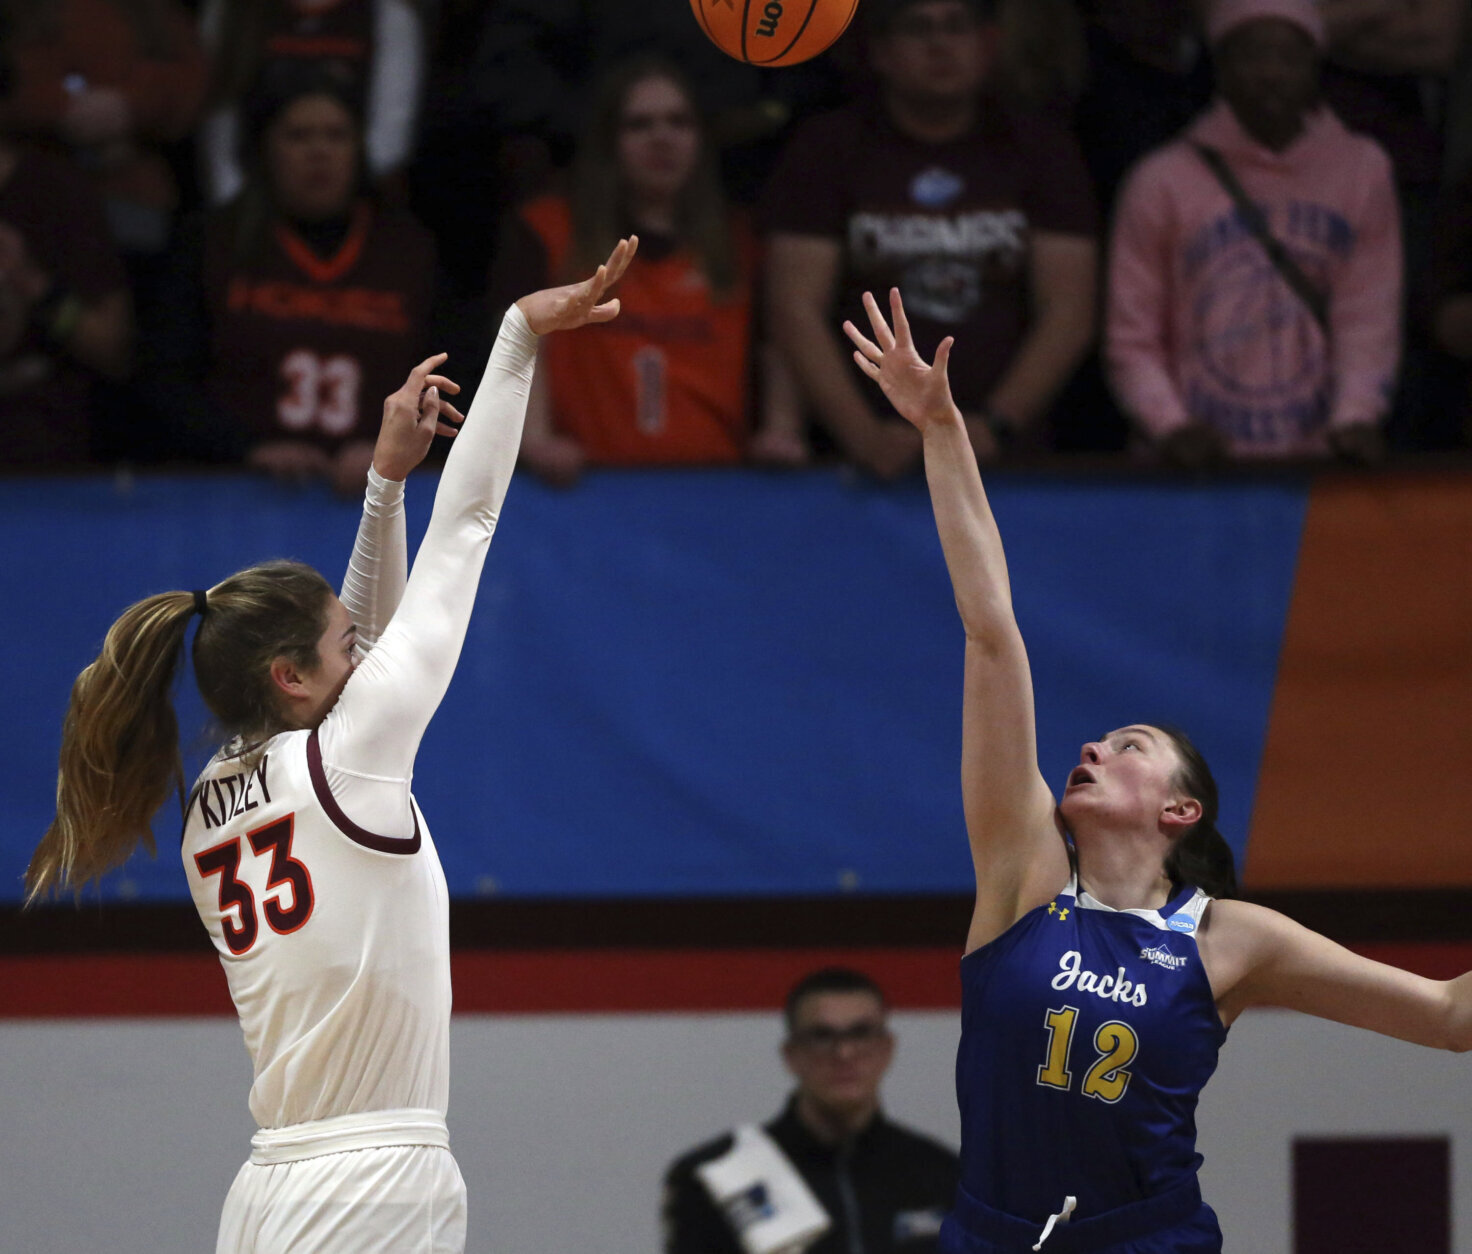 CORRECTS TO SECOND-ROUND NOT FIRST-ROUND - Virginia Tech's Elizabeth Kitley (33) shoots over South Dakota State's Kallie Theisen (12) in the first quarter of a second-round college basketball game in the women's NCAA Tournament, Sunday, March 19, 2023, in Blacksburg, Va. (AP Photo/Matt Gentry)